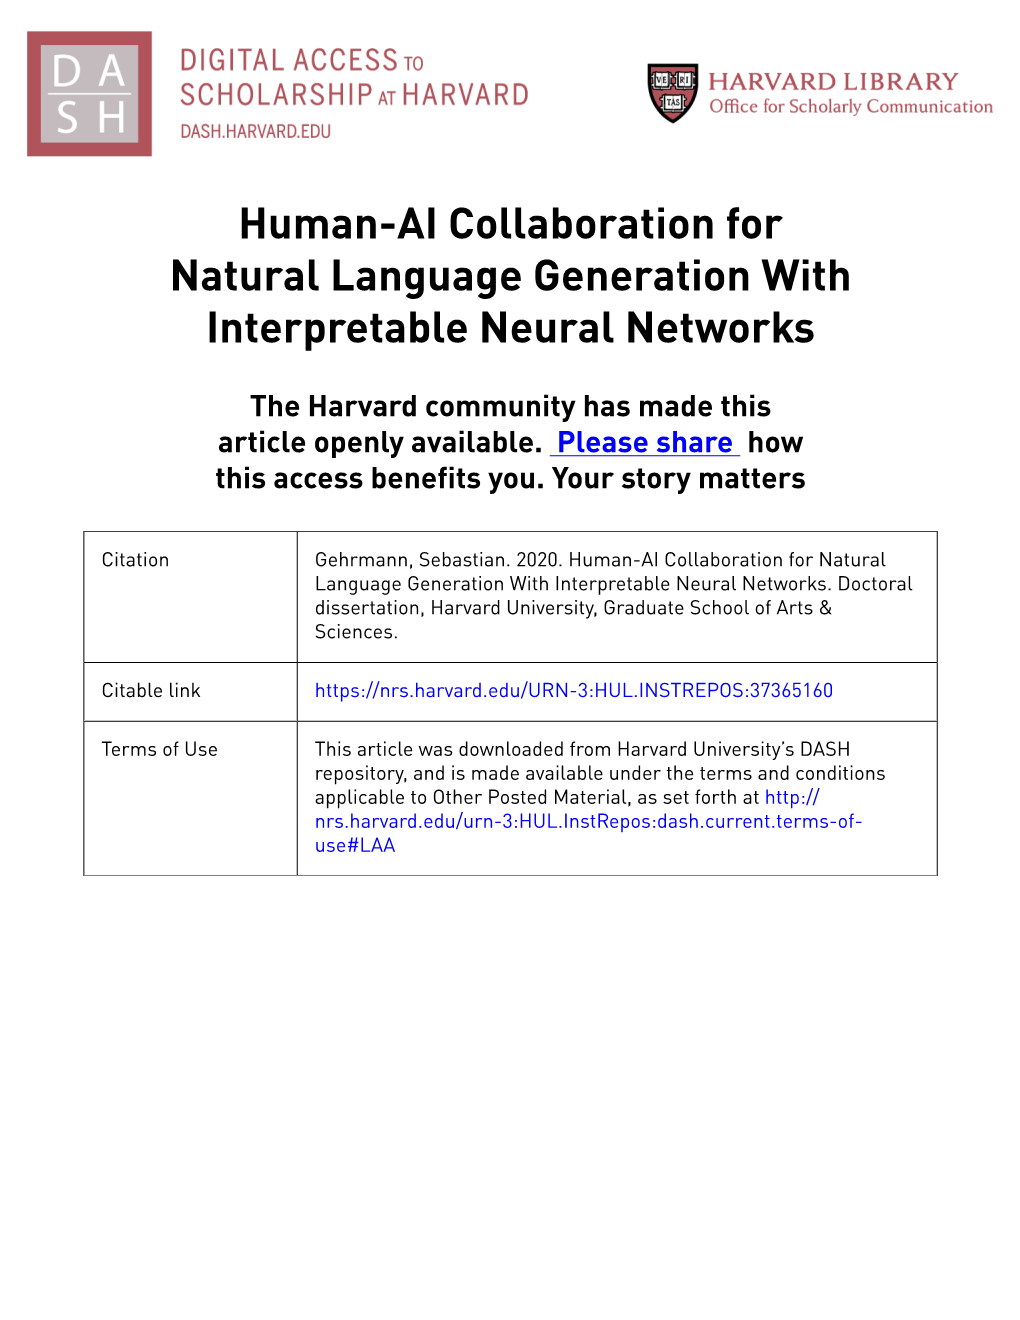 Human-AI Collaboration for Natural Language Generation with Interpretable Neural Networks